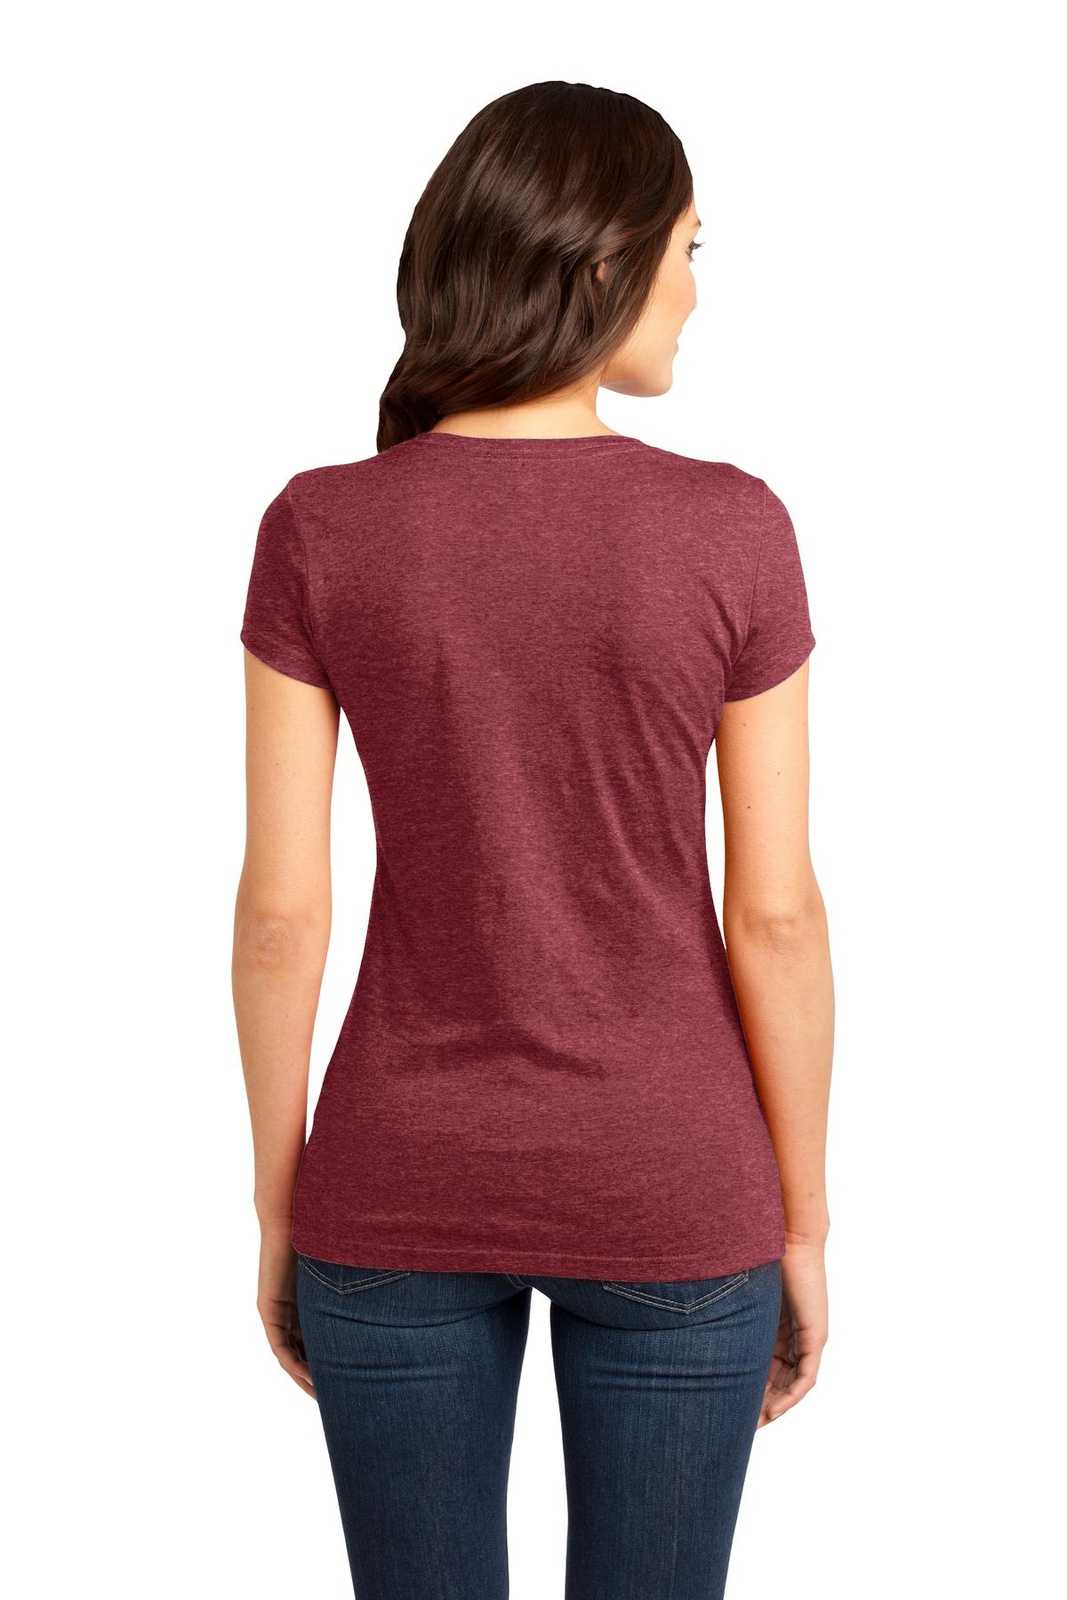 District DT6001 Women's Fitted Very Important Tee - Heathered Red - HIT a Double - 1